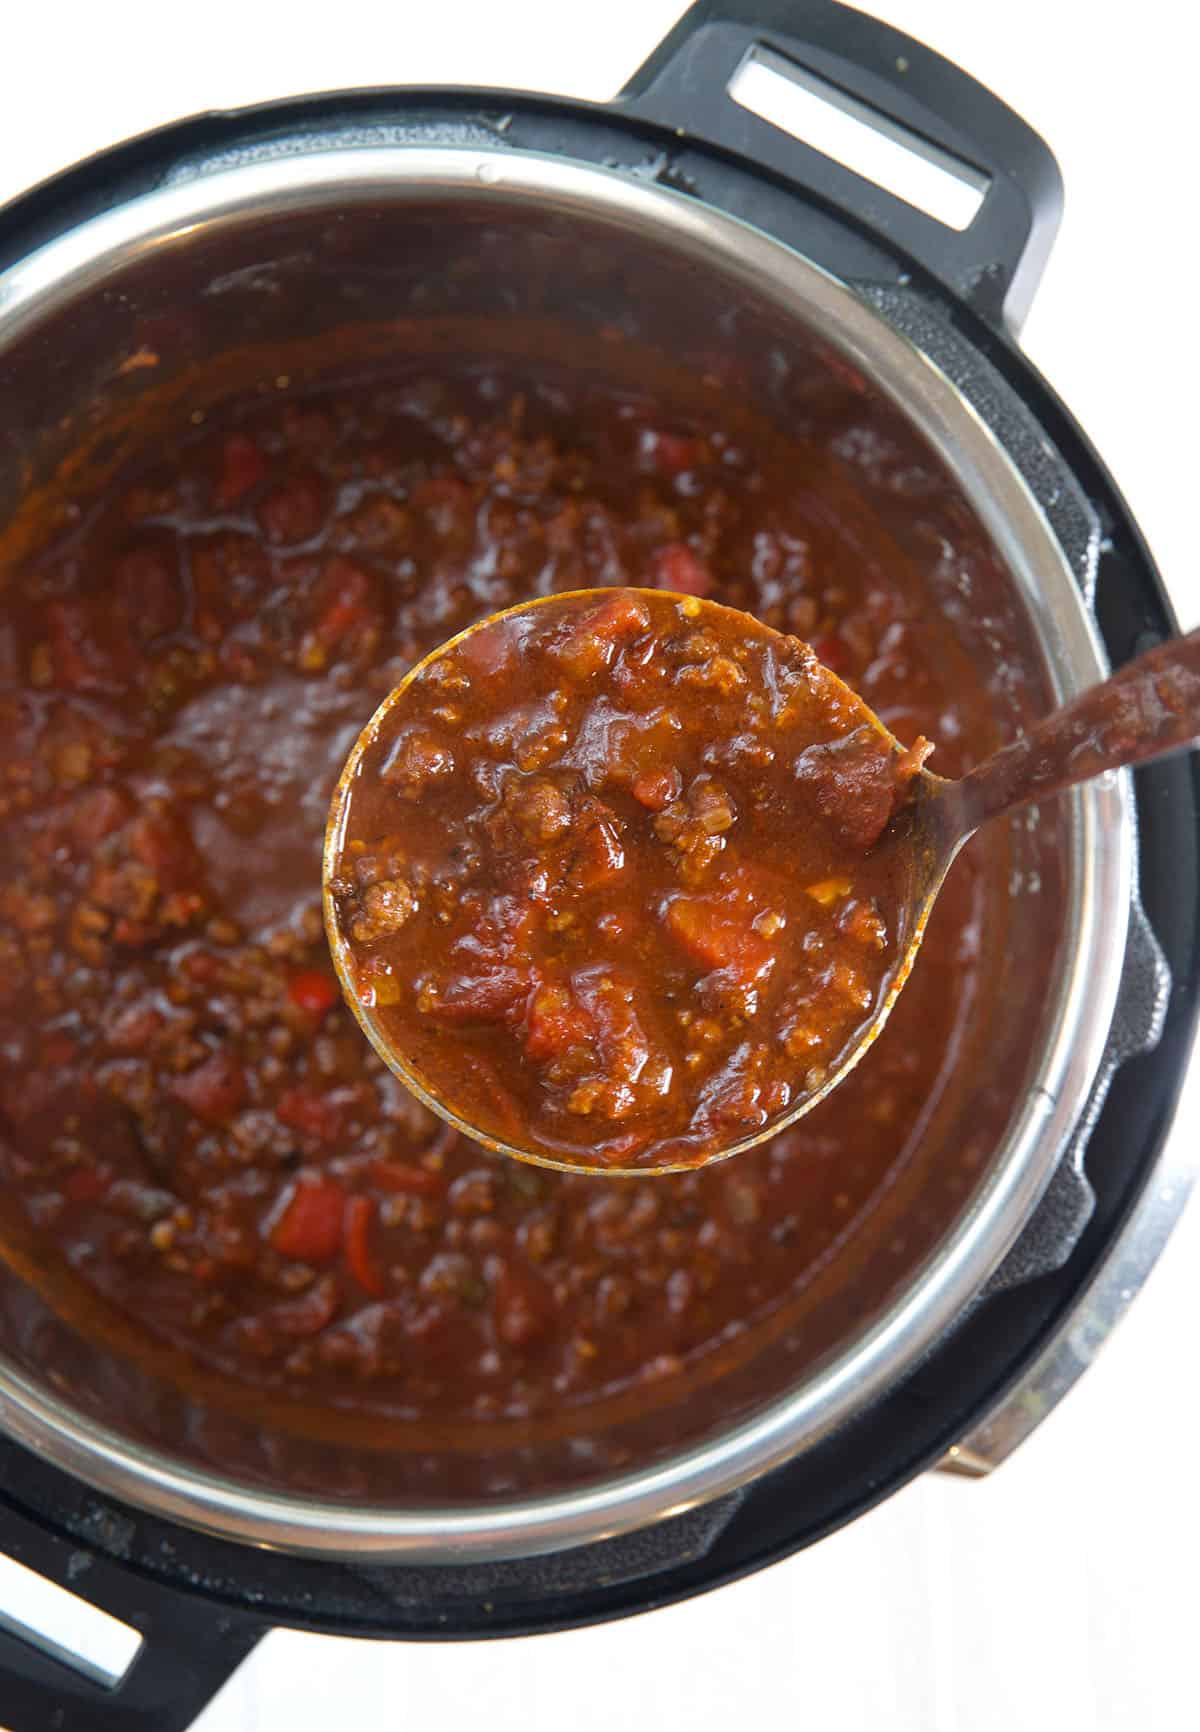 A ladel is scooping out a serving of chili from the Instant Pot.